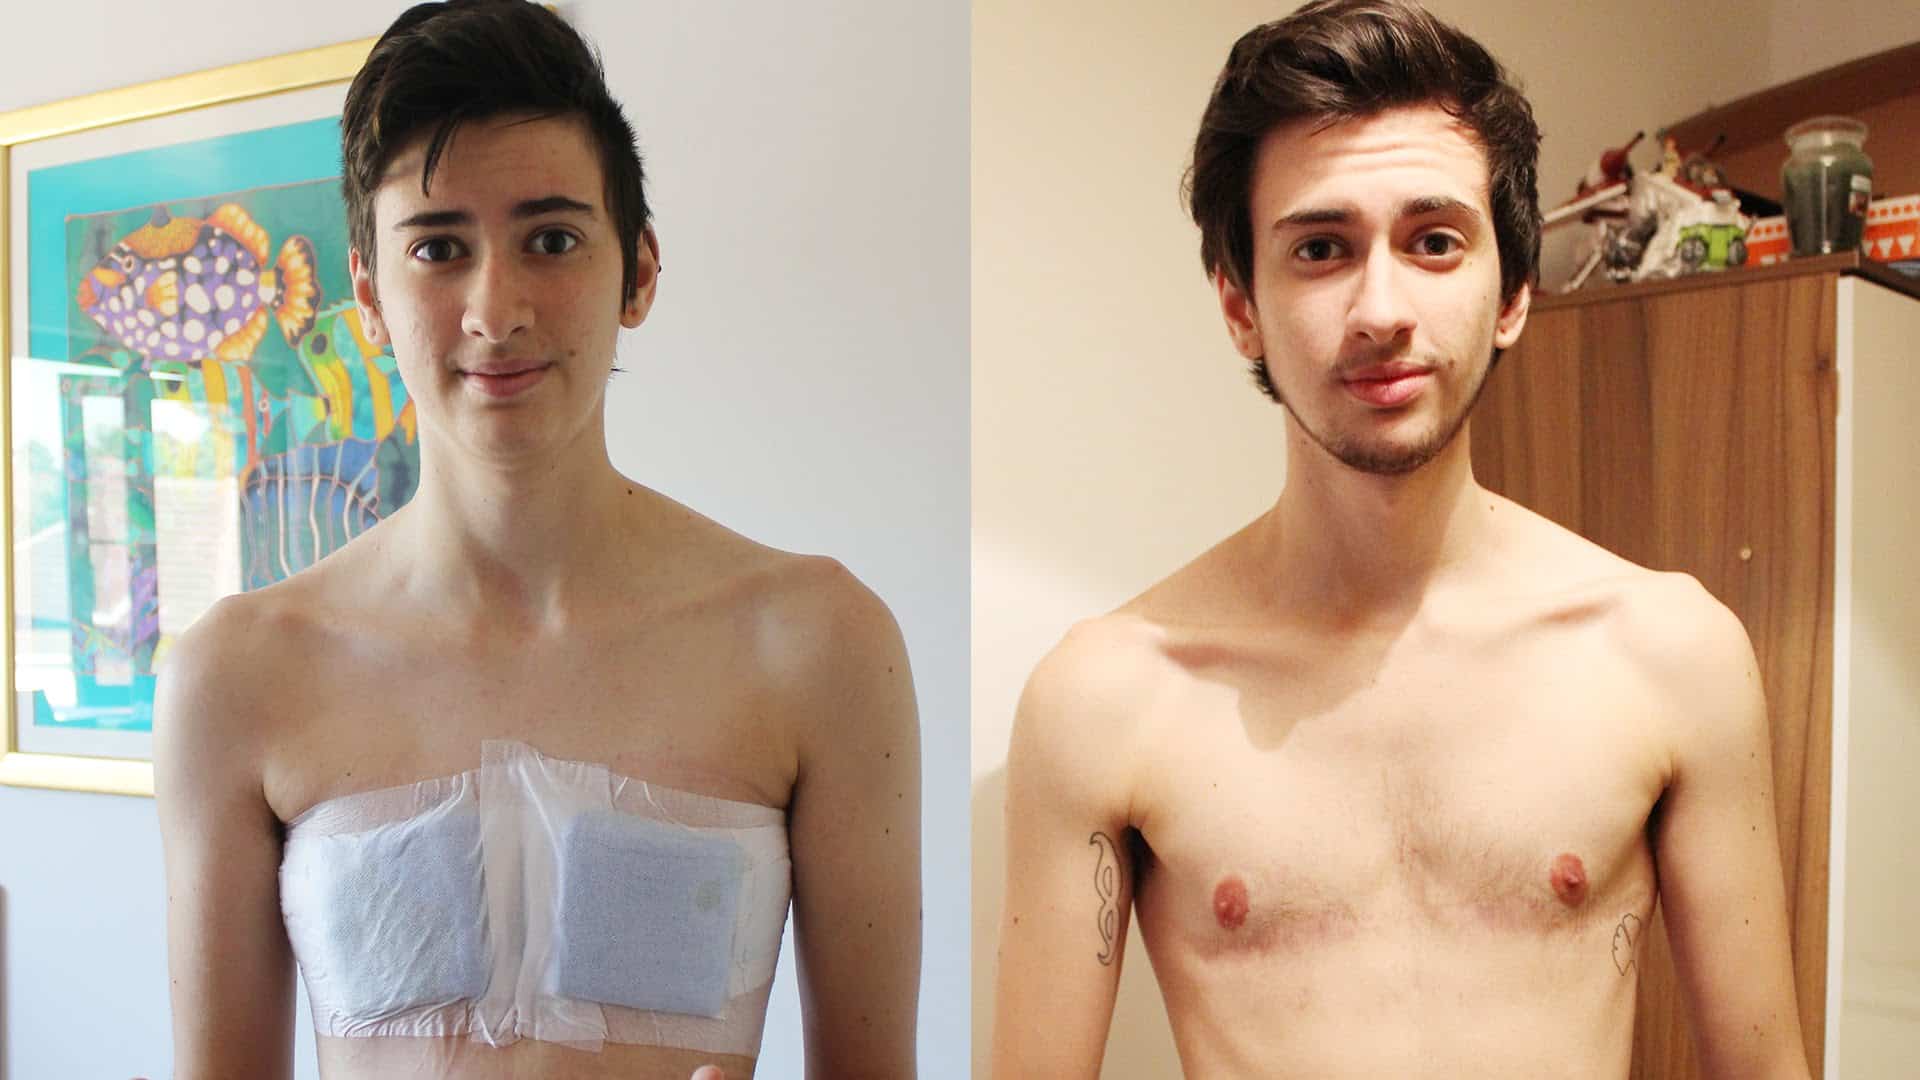 female to male gender reassignment surgery australia cost